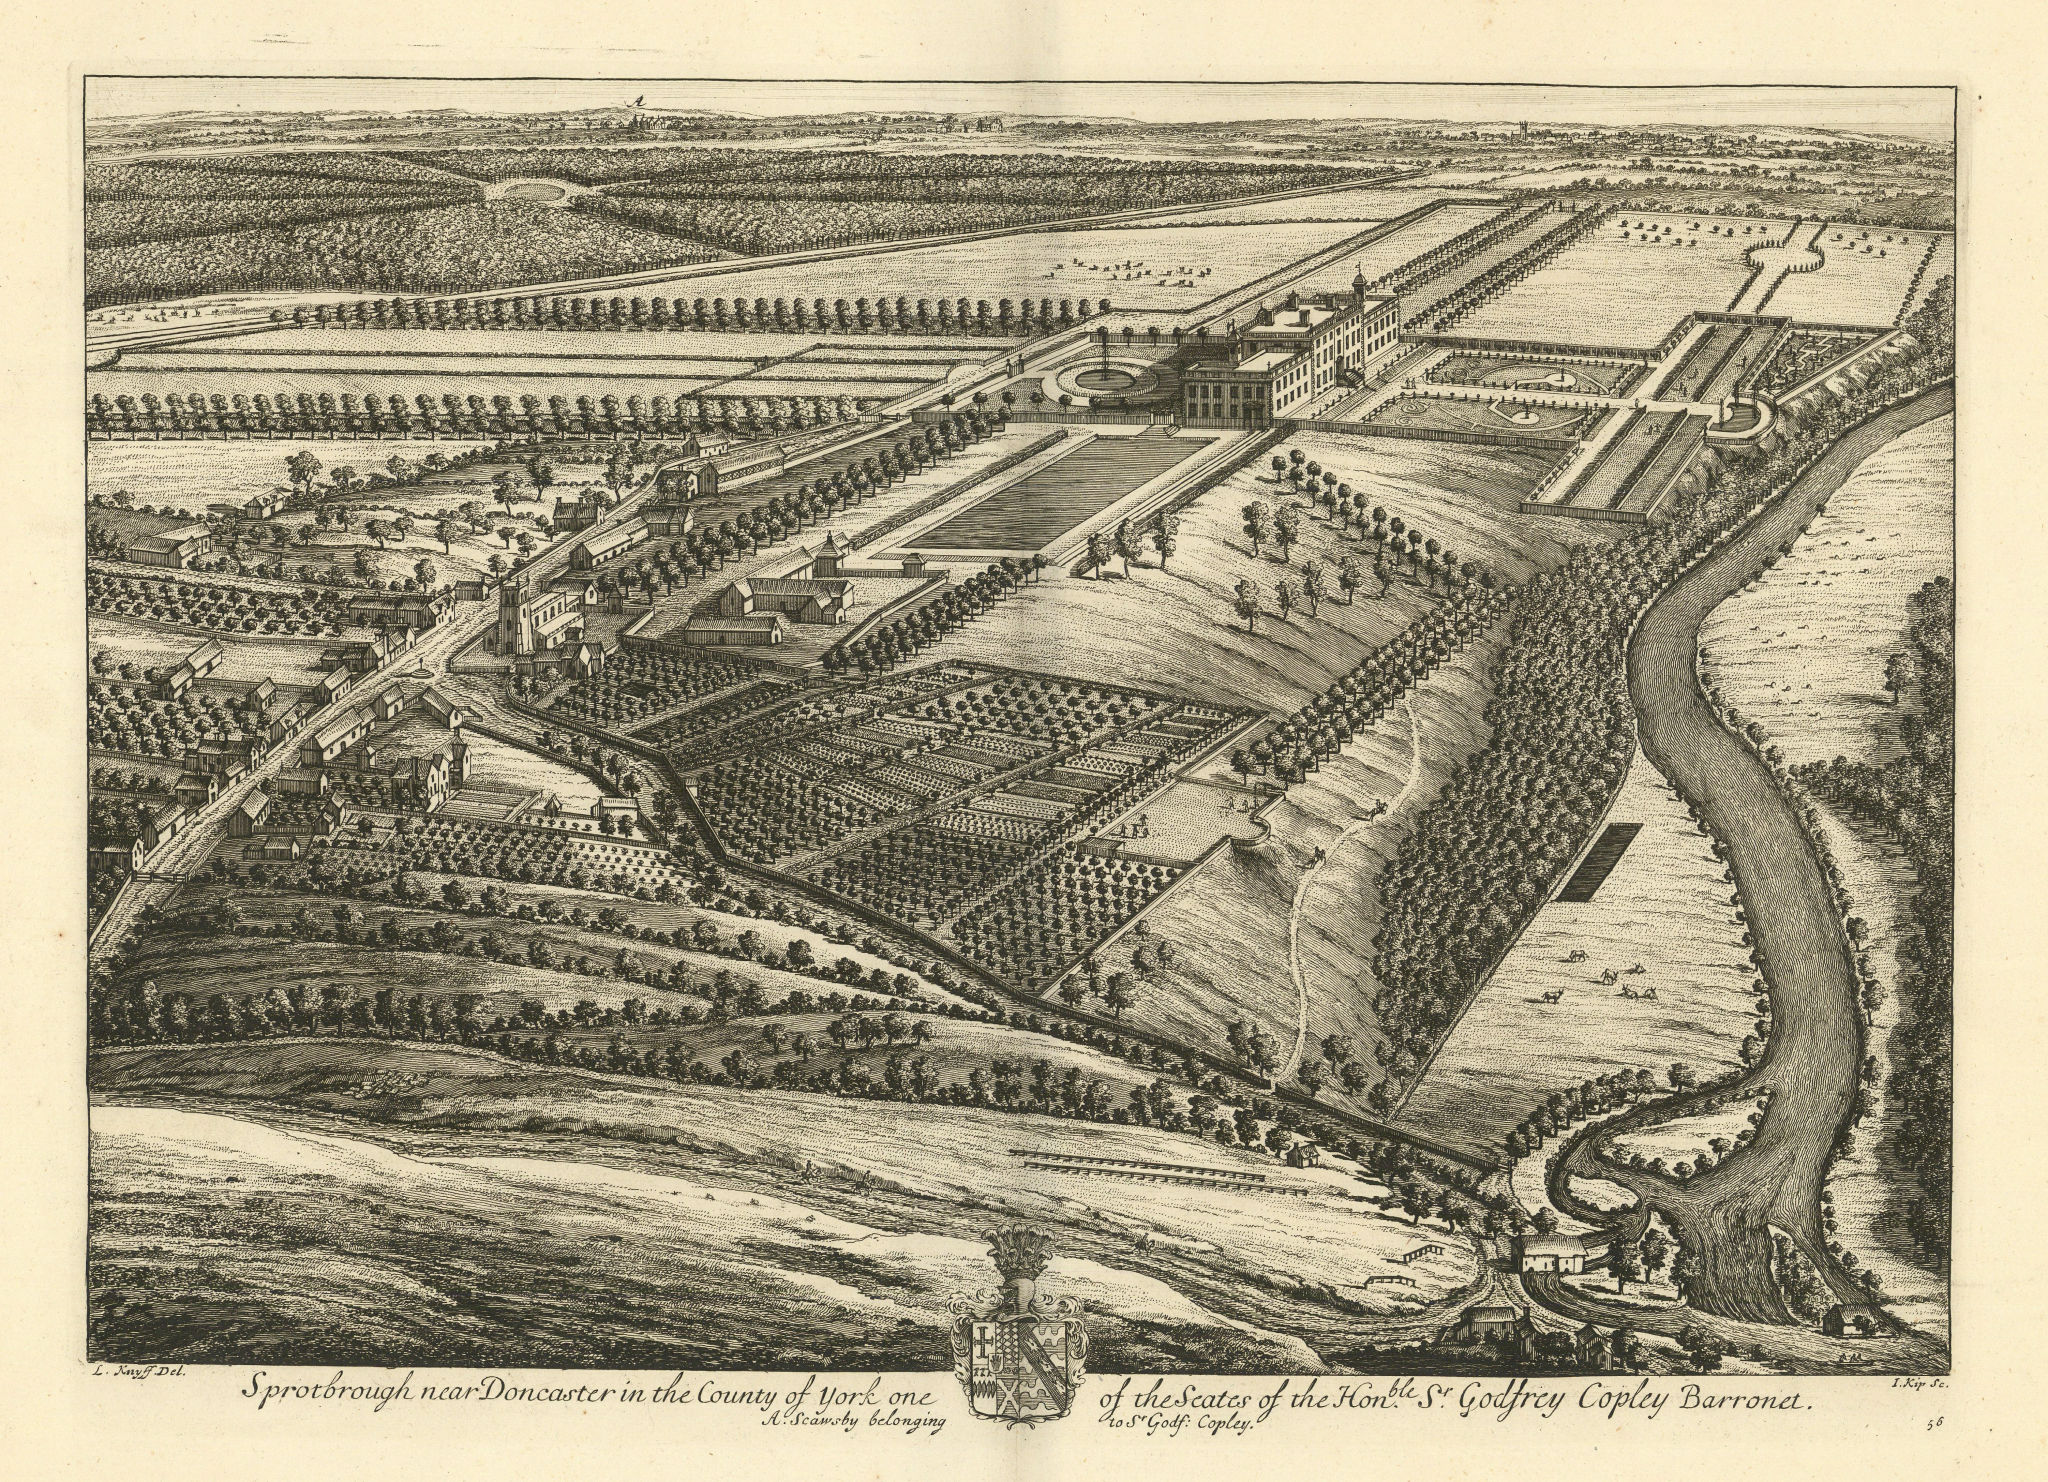 Associate Product "Sprotbrough [Hall] near Doncaster in the County of York" by Kip & Knyff 1709